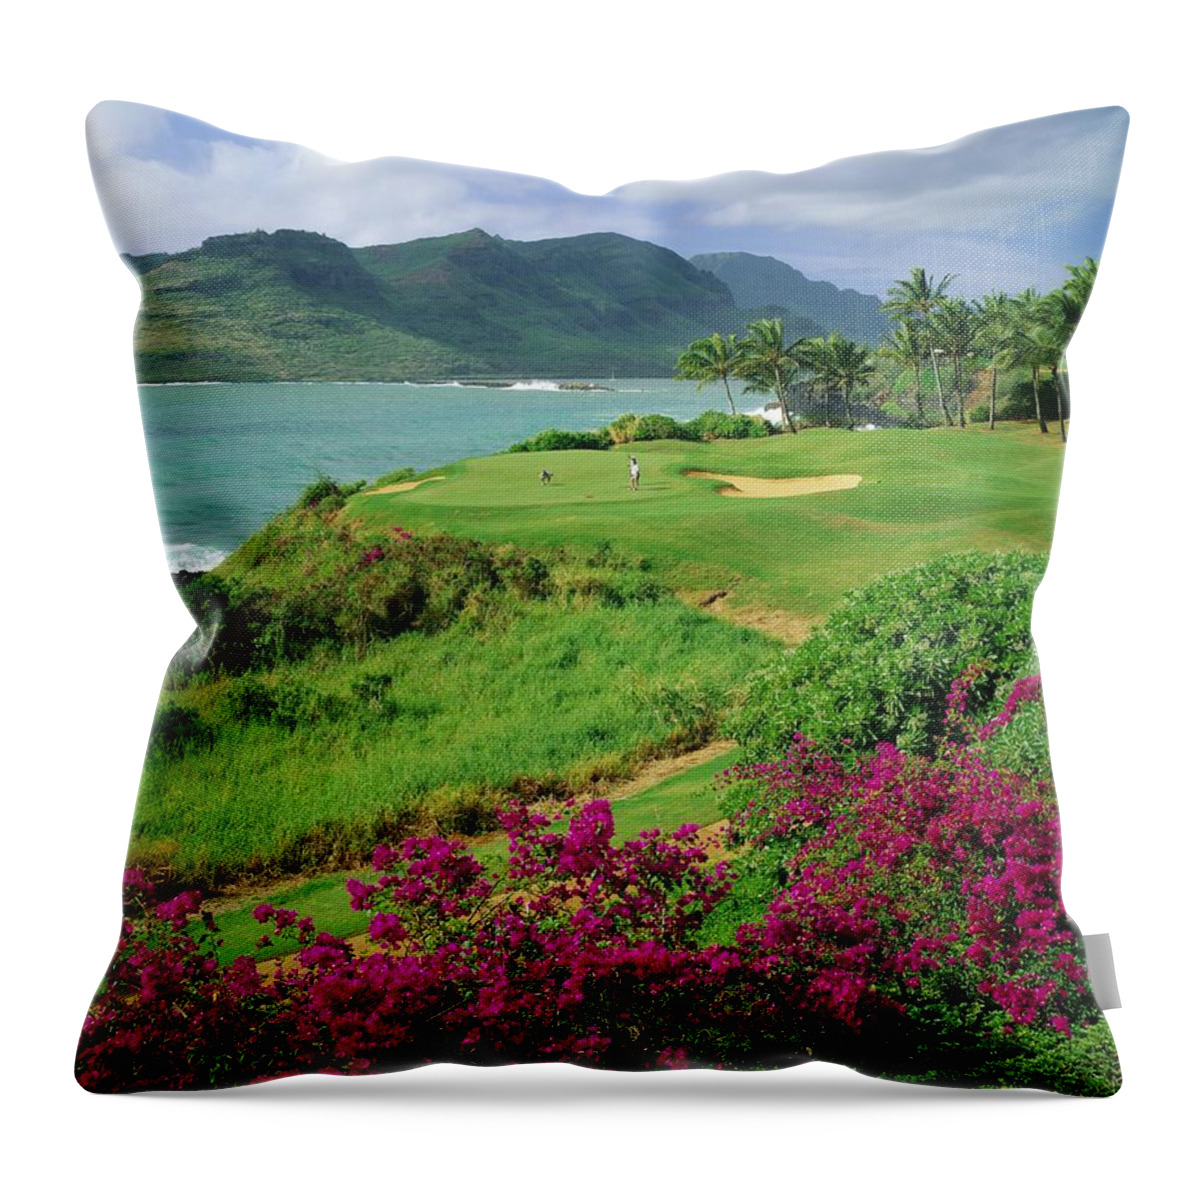 Estock Throw Pillow featuring the digital art Bay & Golf Course by Giovanni Simeone